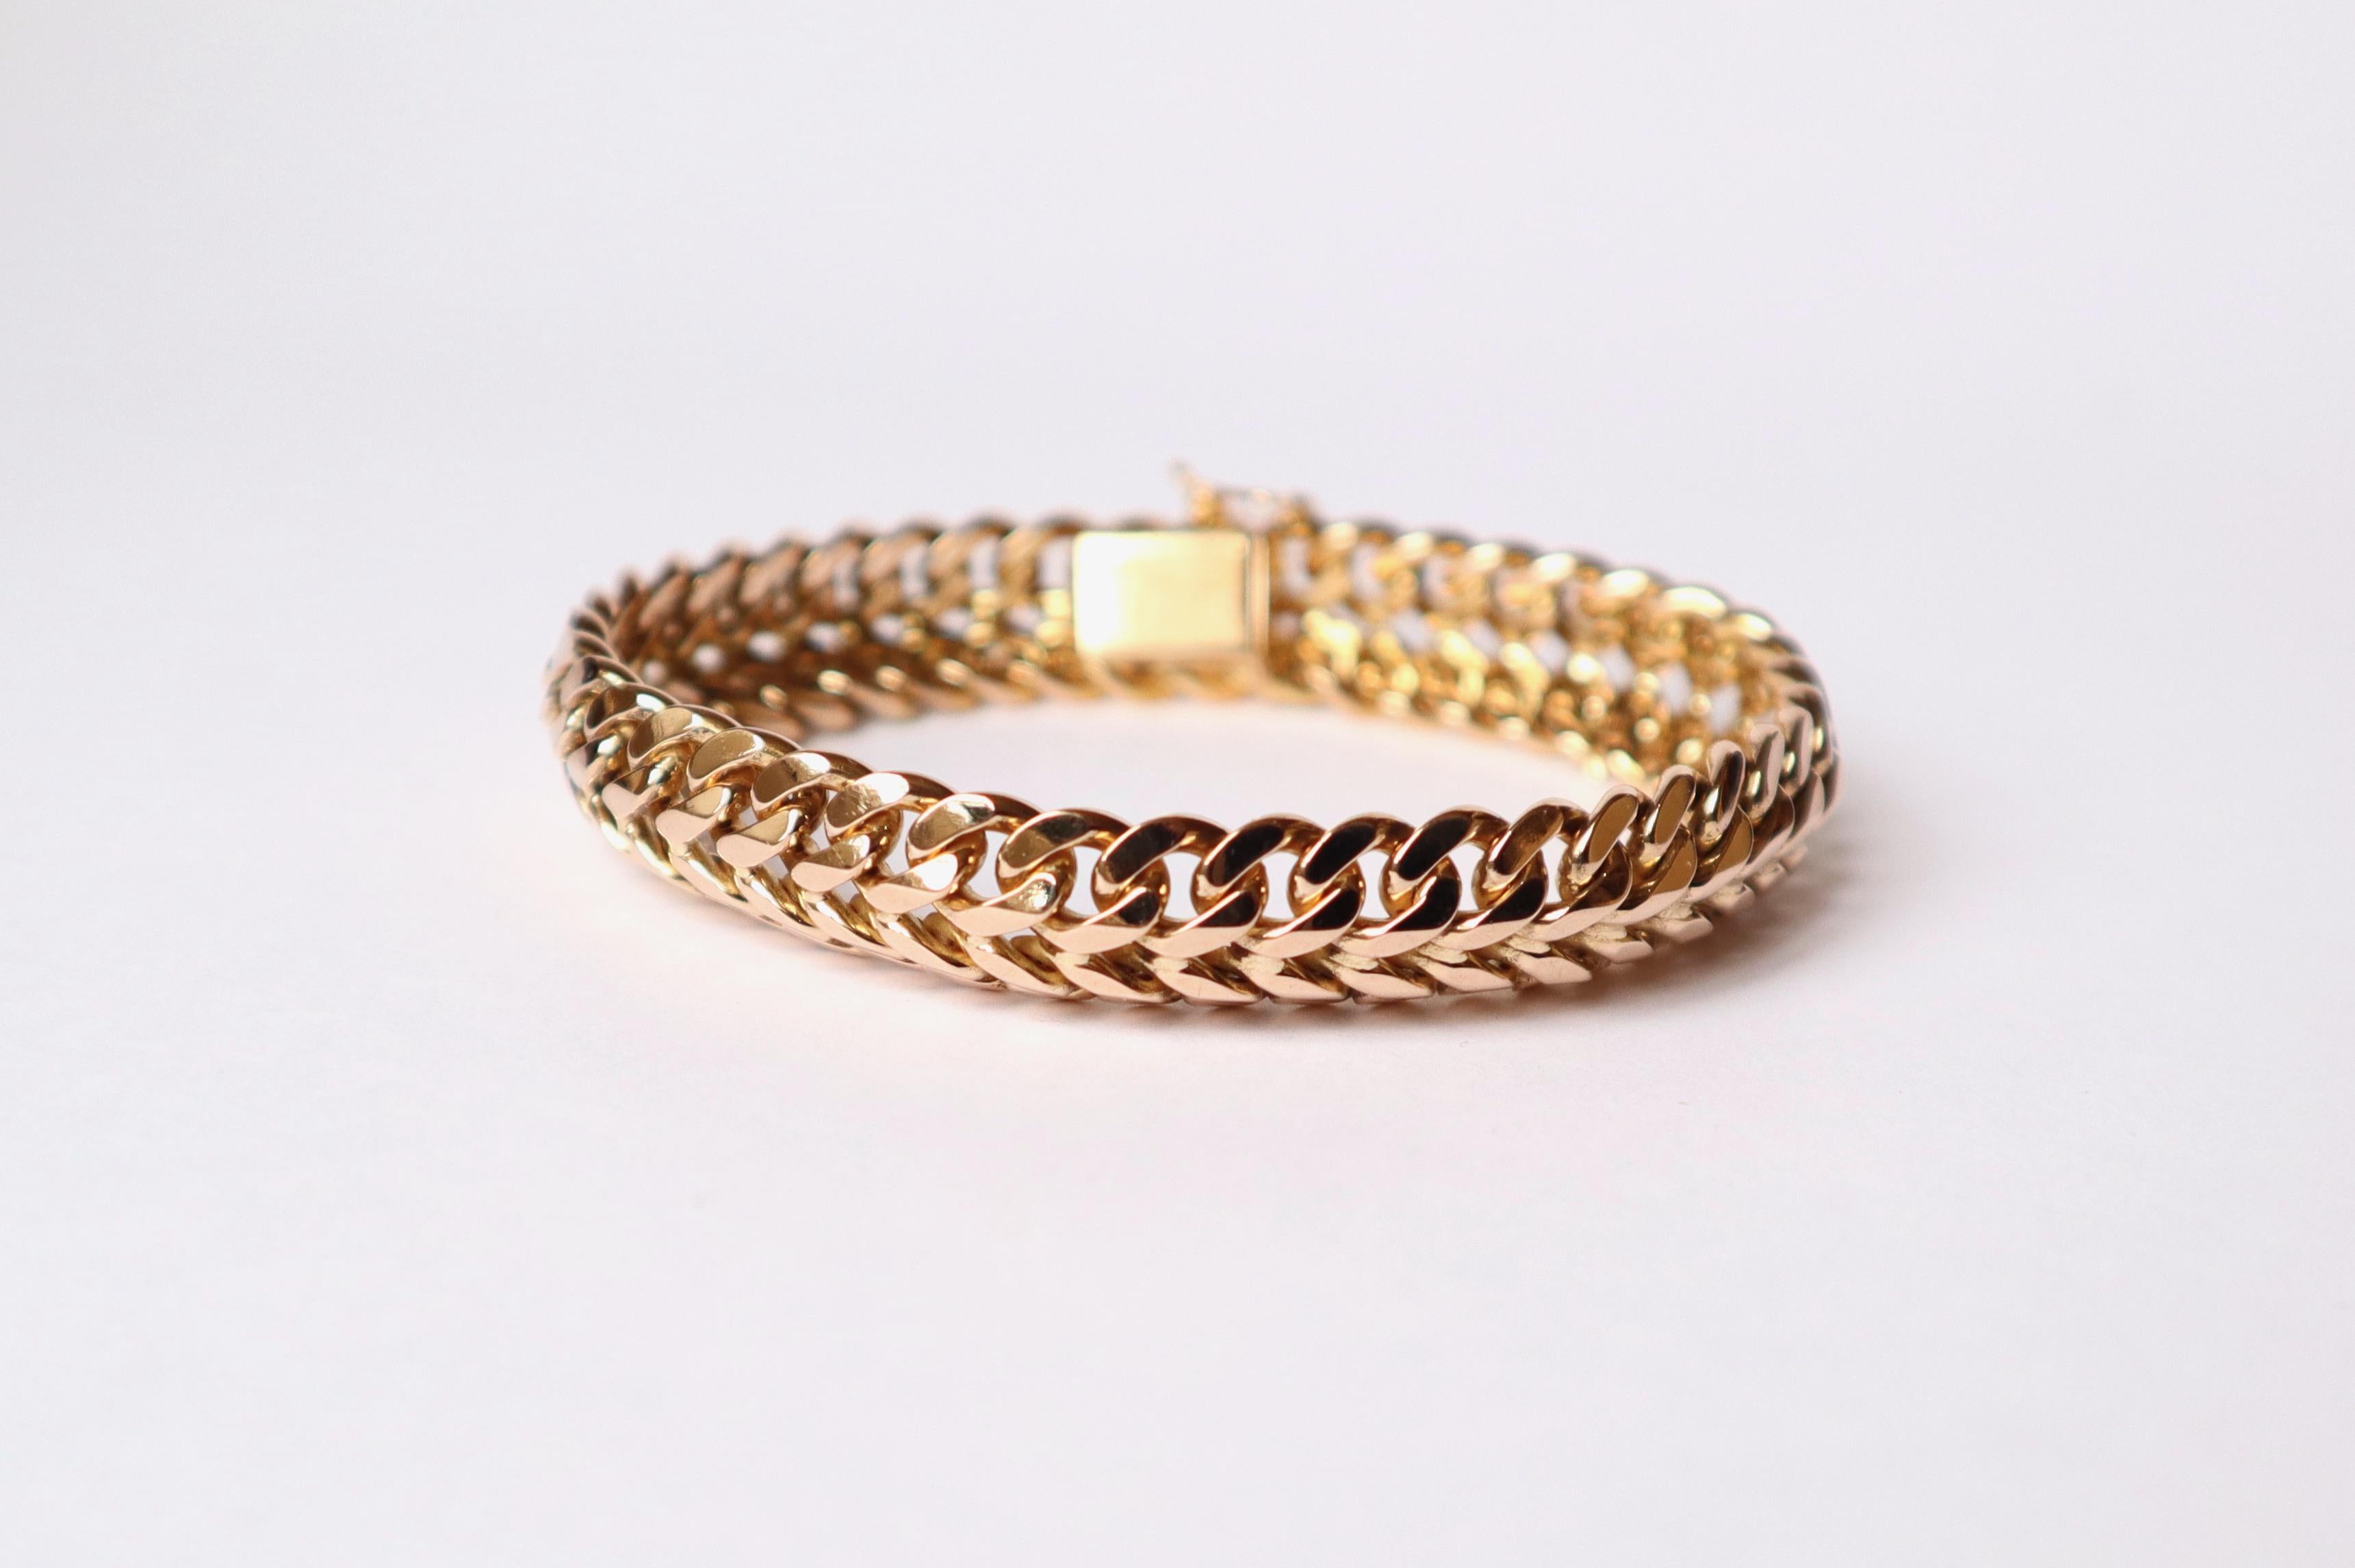 Vintage double curb link bracelet circa 1960 in 18 Kt yellow gold articulated links
Weight: 53.1g 
Length: 19cm Width: 1.2cm. 
Eagle head hallmark.